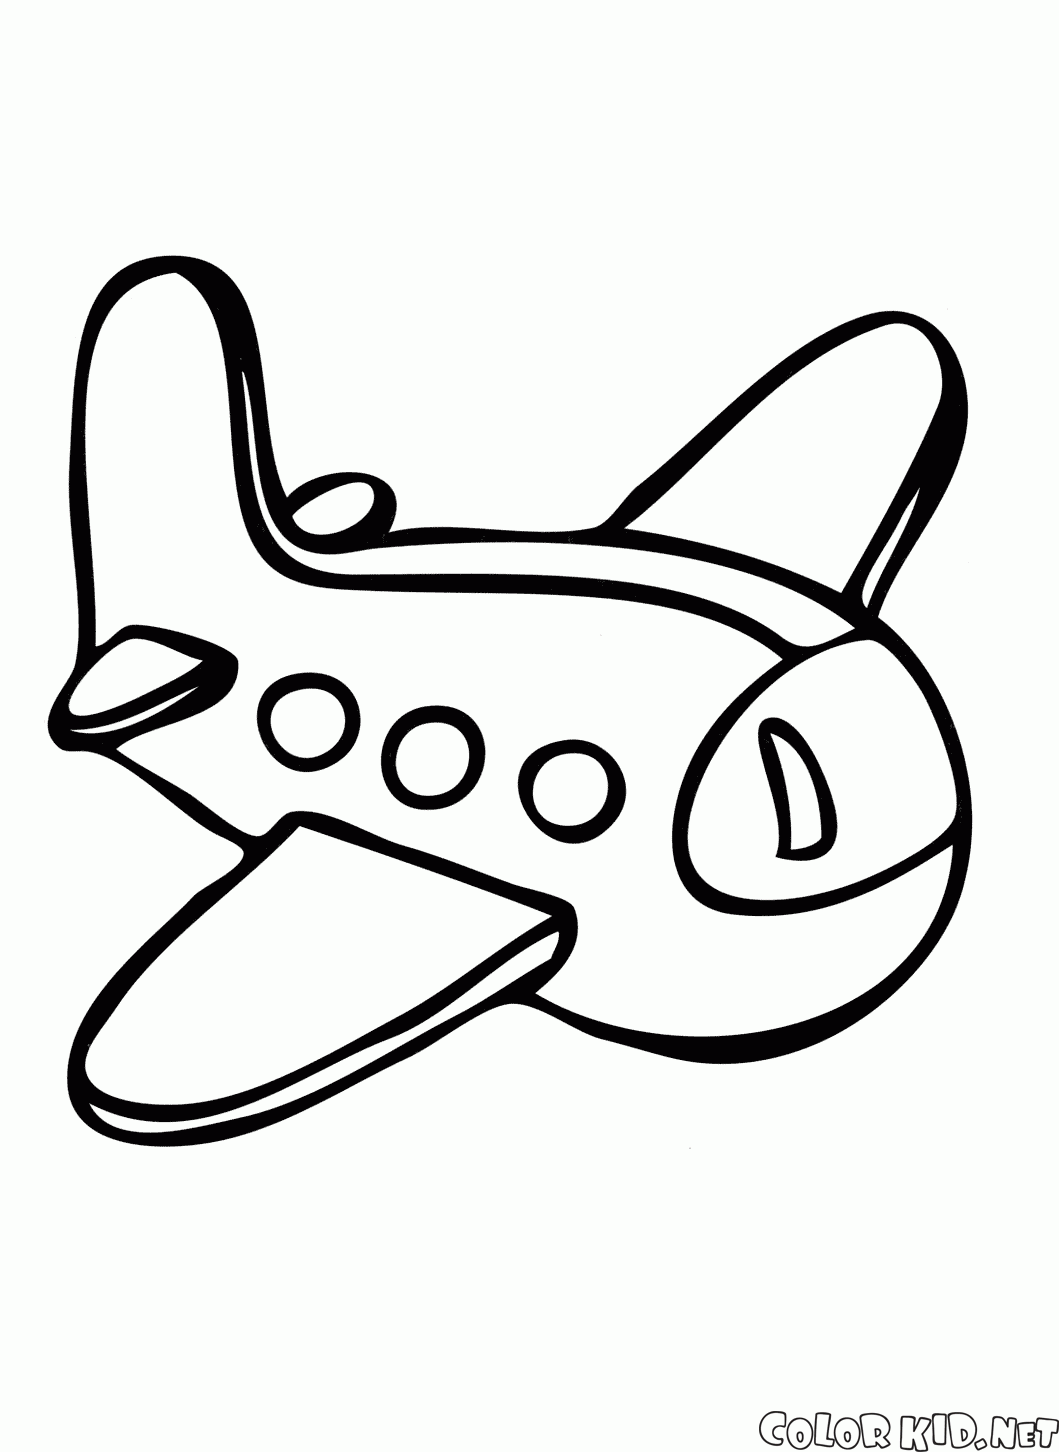 Coloring page - Toy Plane